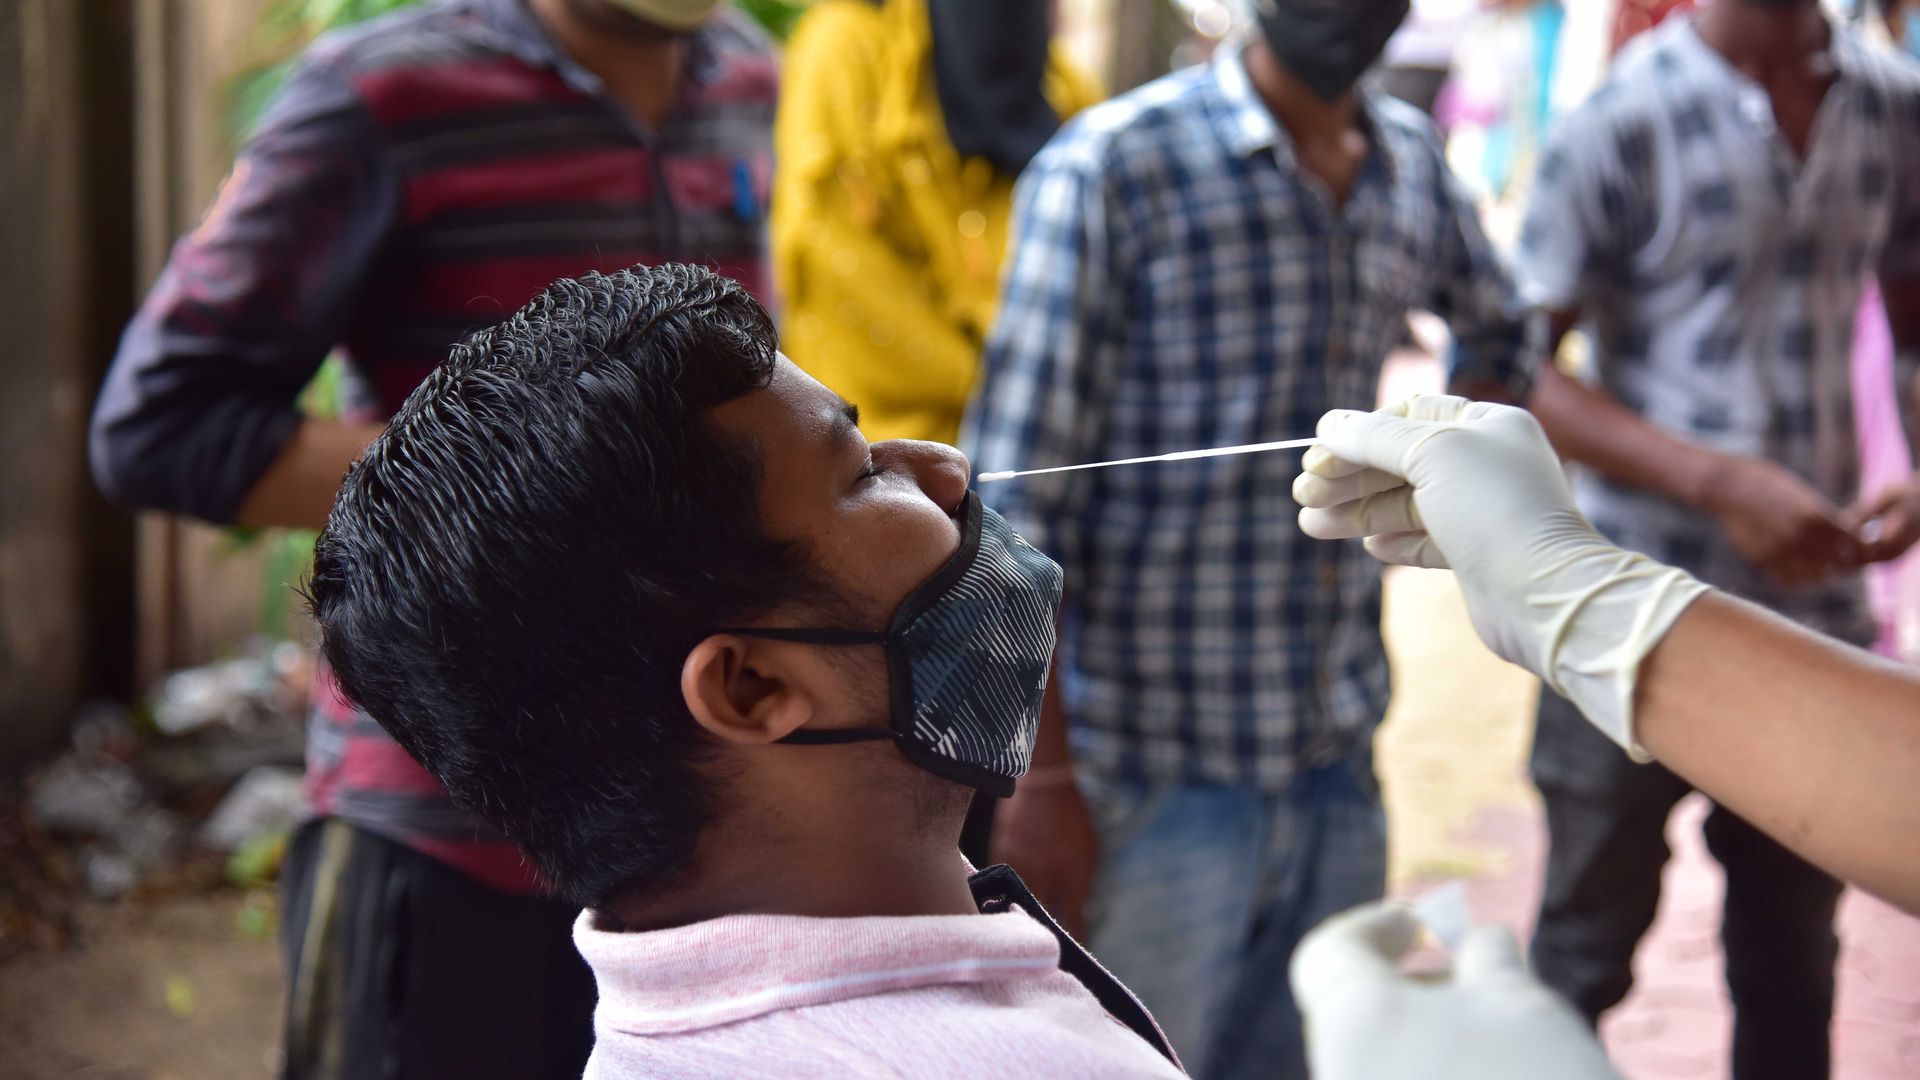 A person receiving a coronavirus test in Assam, India, on July 2.